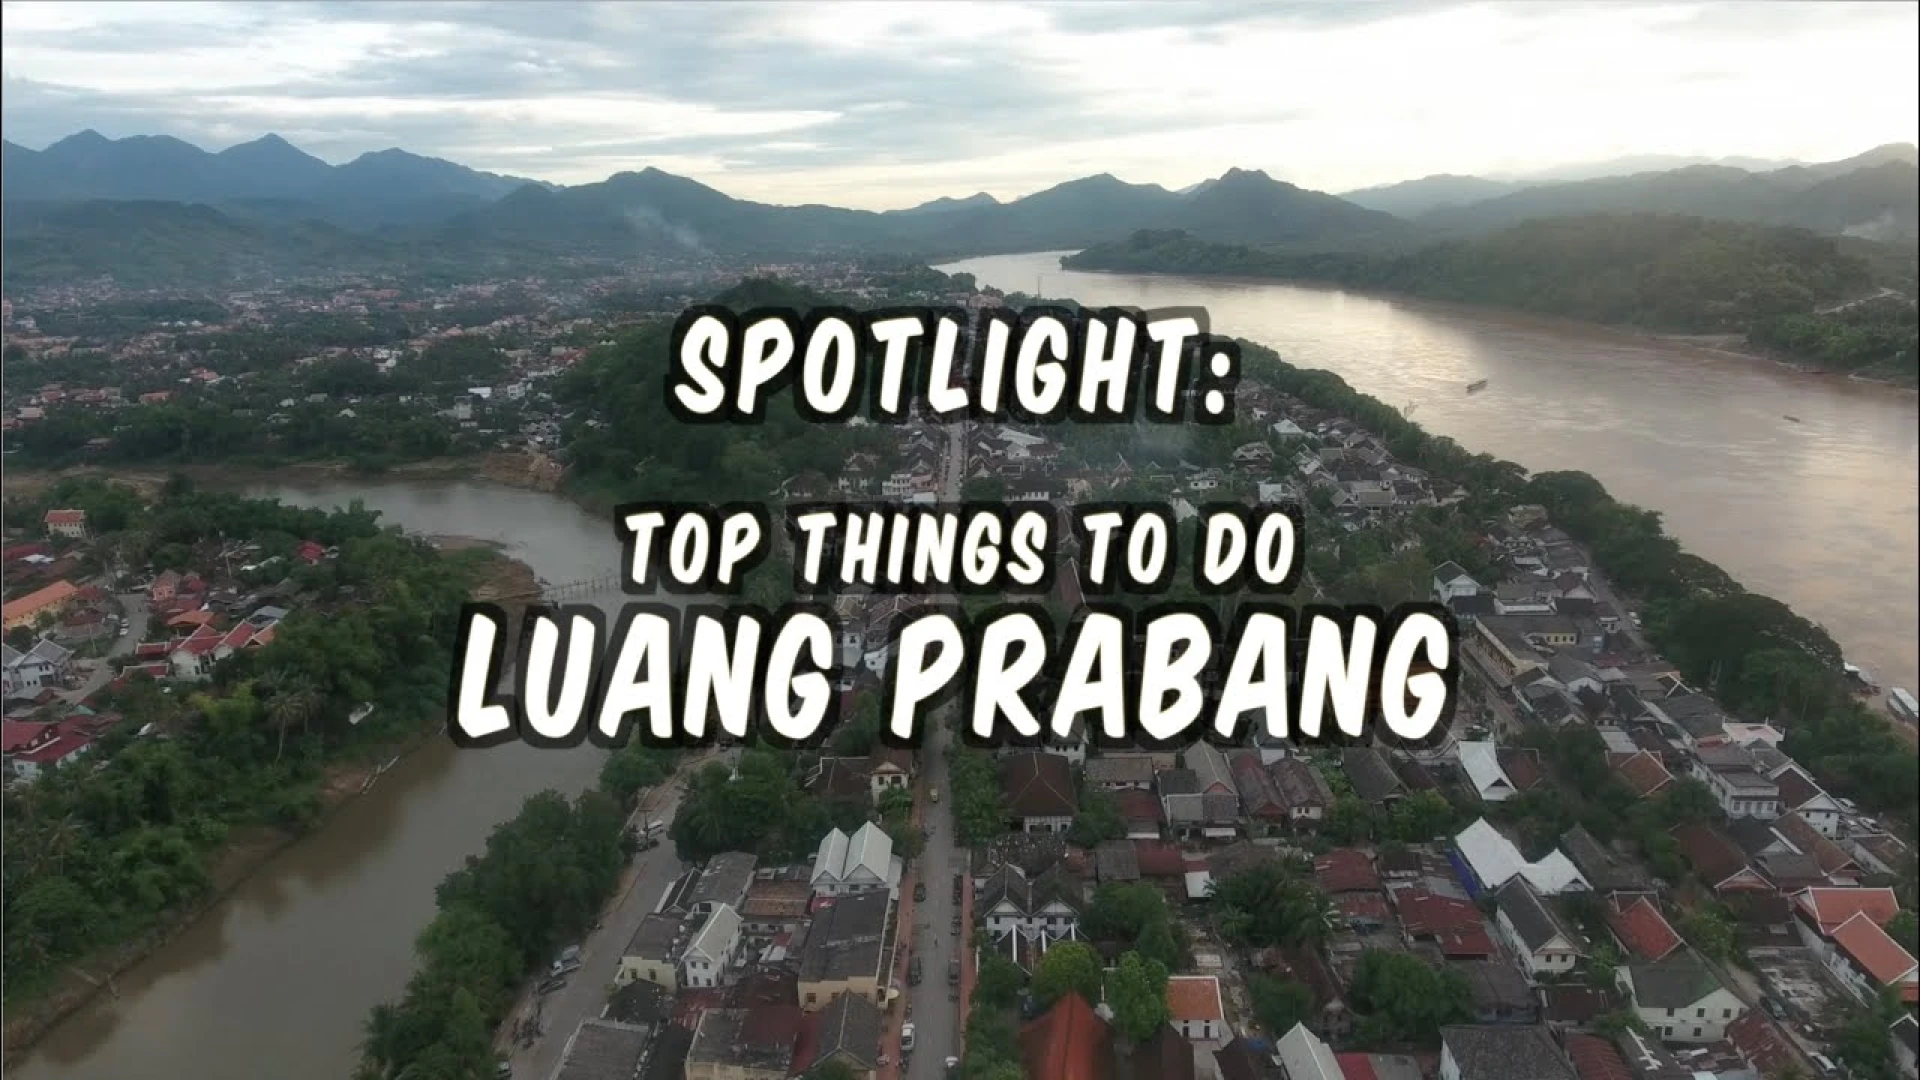 “A Guide to Buying Ethnic Handicrafts in Luang Prabang” Hands-On Talk